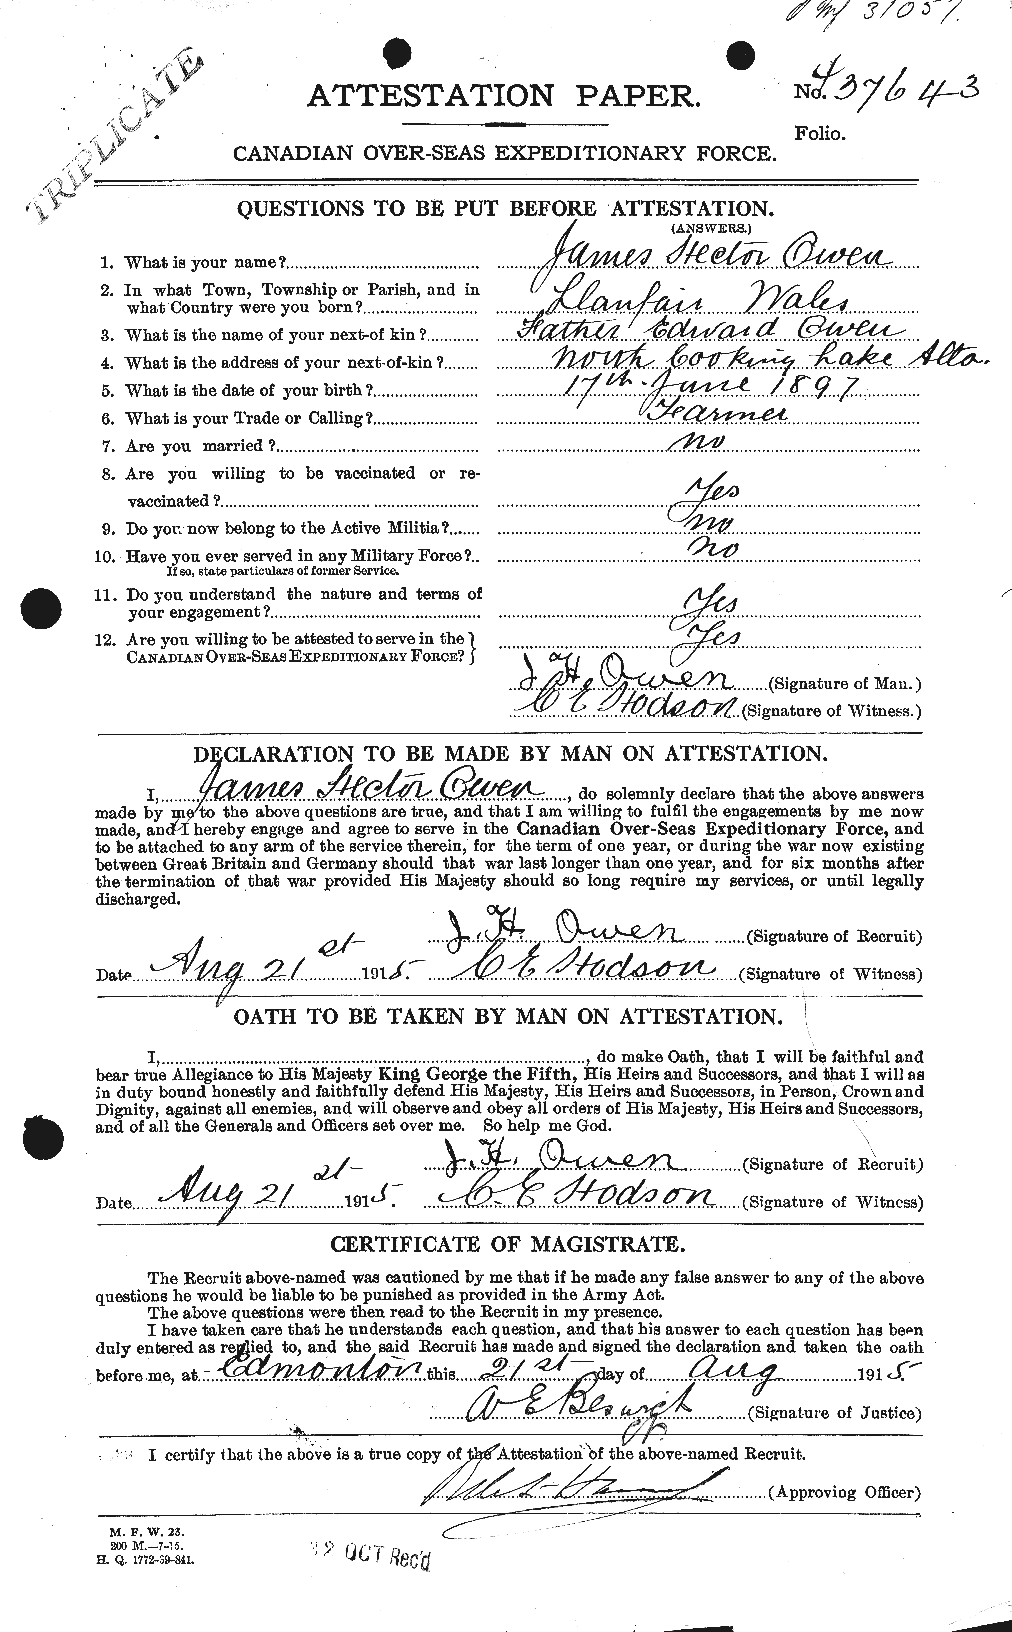 Personnel Records of the First World War - CEF 561312a